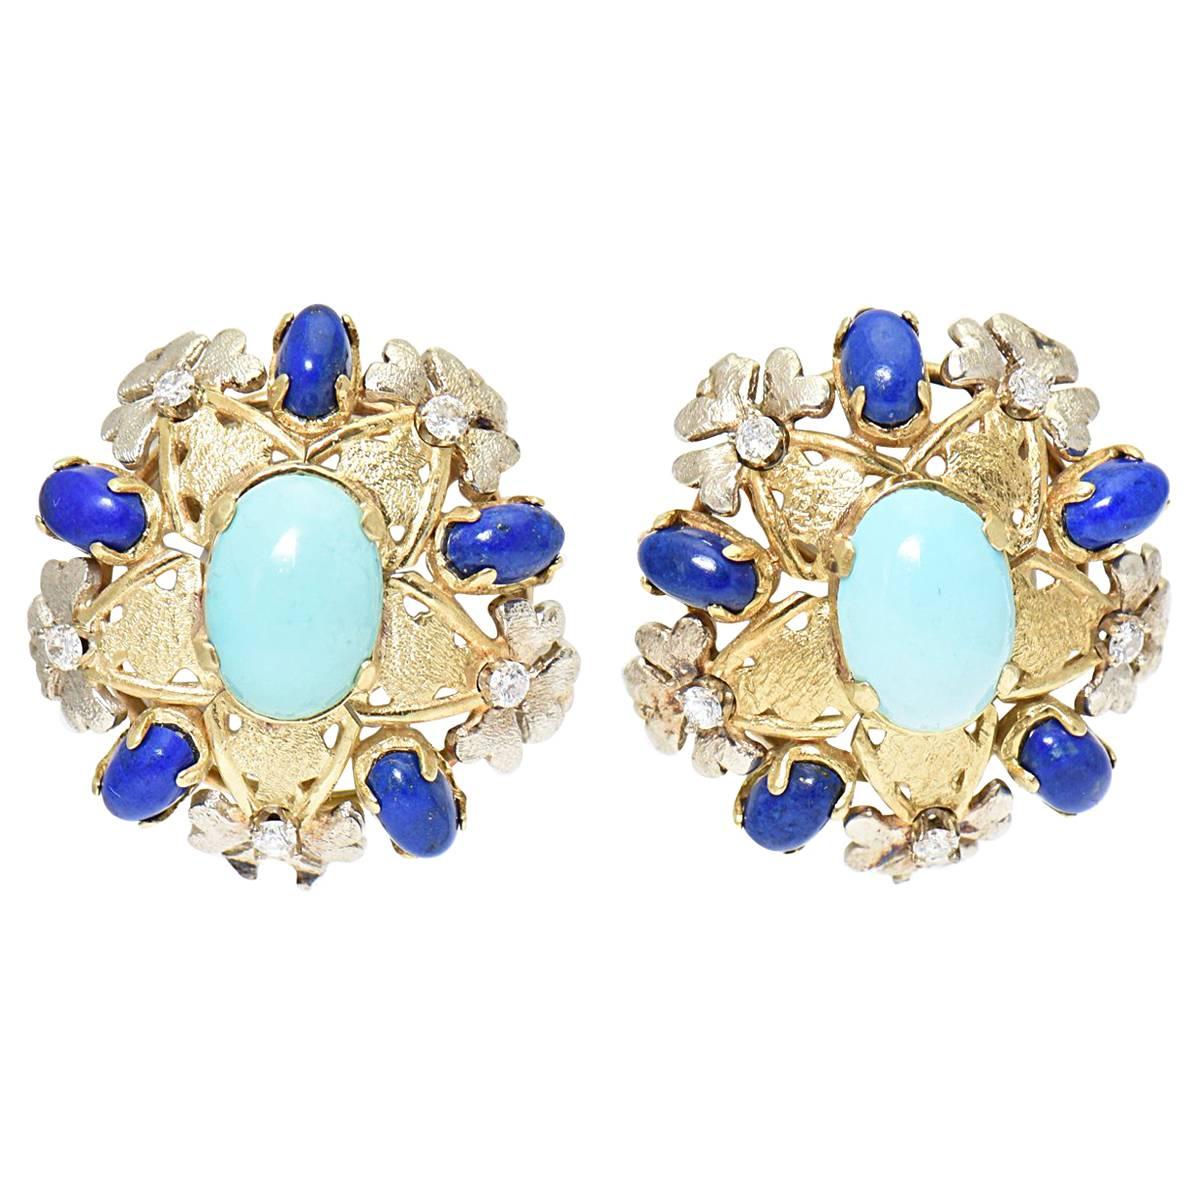 Turquoise, Lapis, Diamond and Two-Tone Gold Floral Clip Earrings